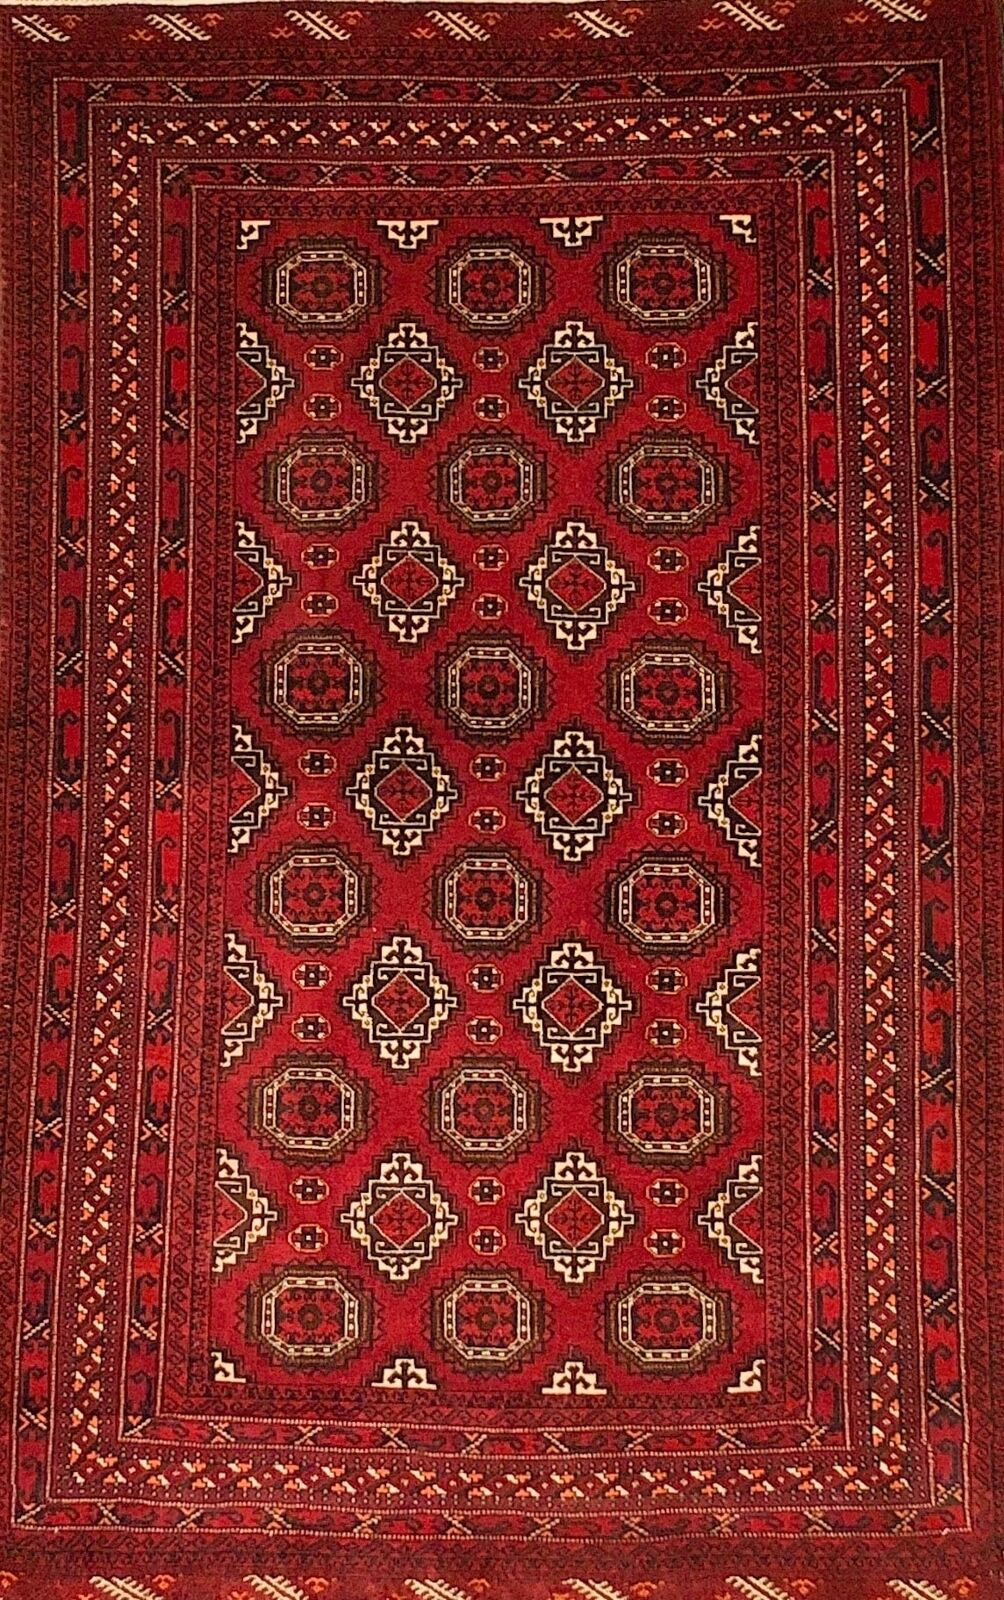 Hand-knotted Rug (Carpet) 4'2X6'4, Baluch mint condition